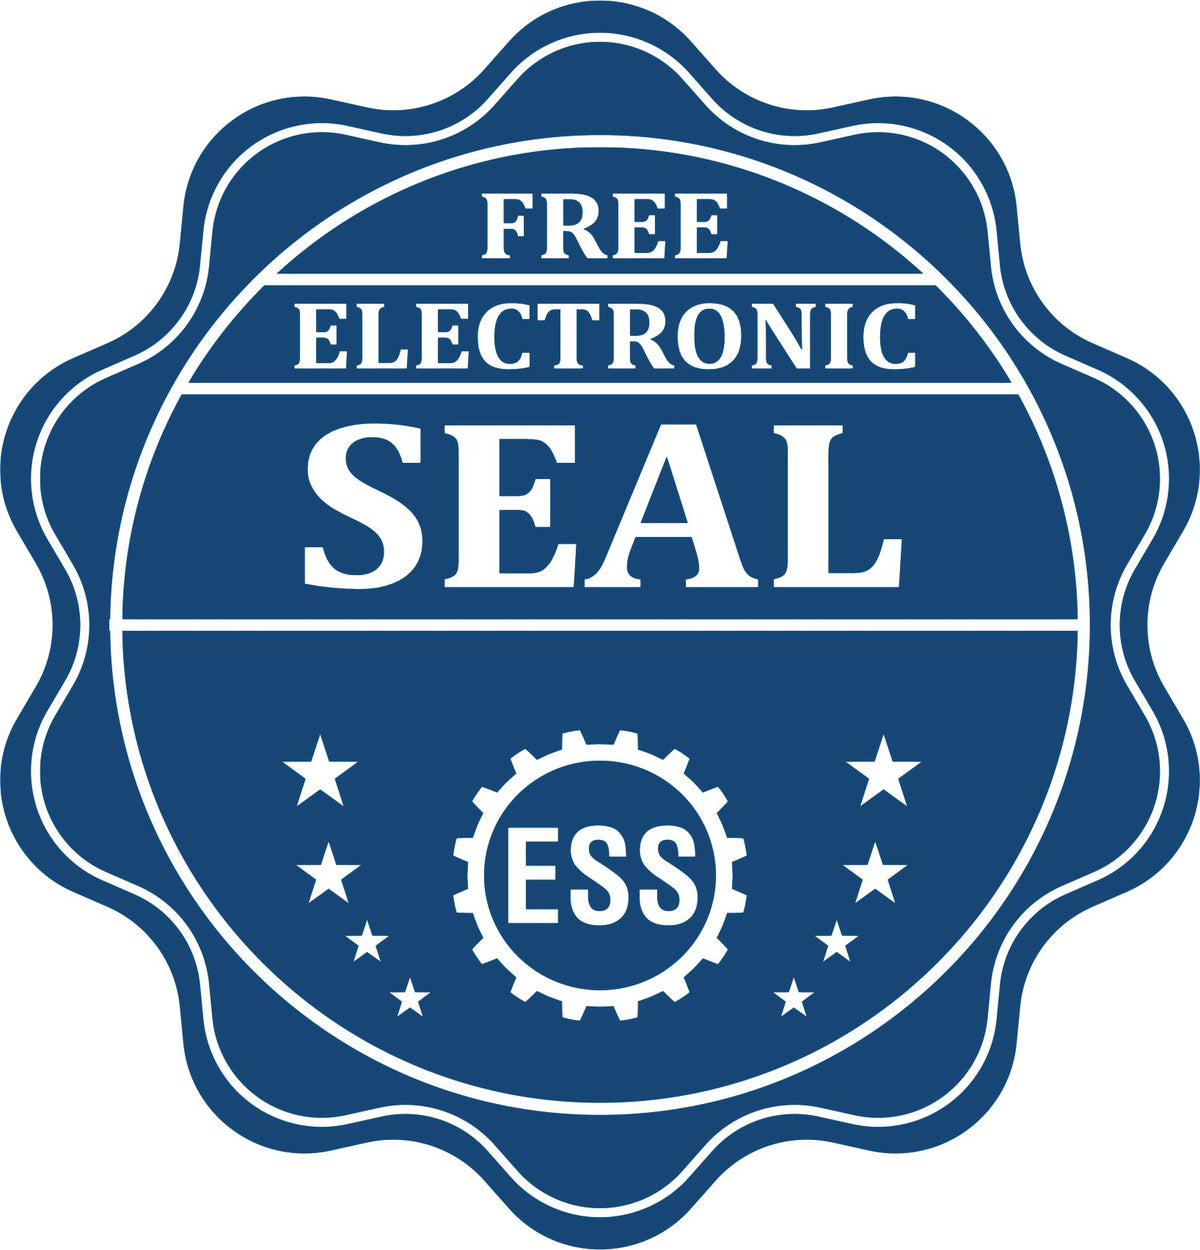 A badge showing a free electronic seal for the Soft Texas Professional Engineer Seal with stars and the ESS gear on the emblem.